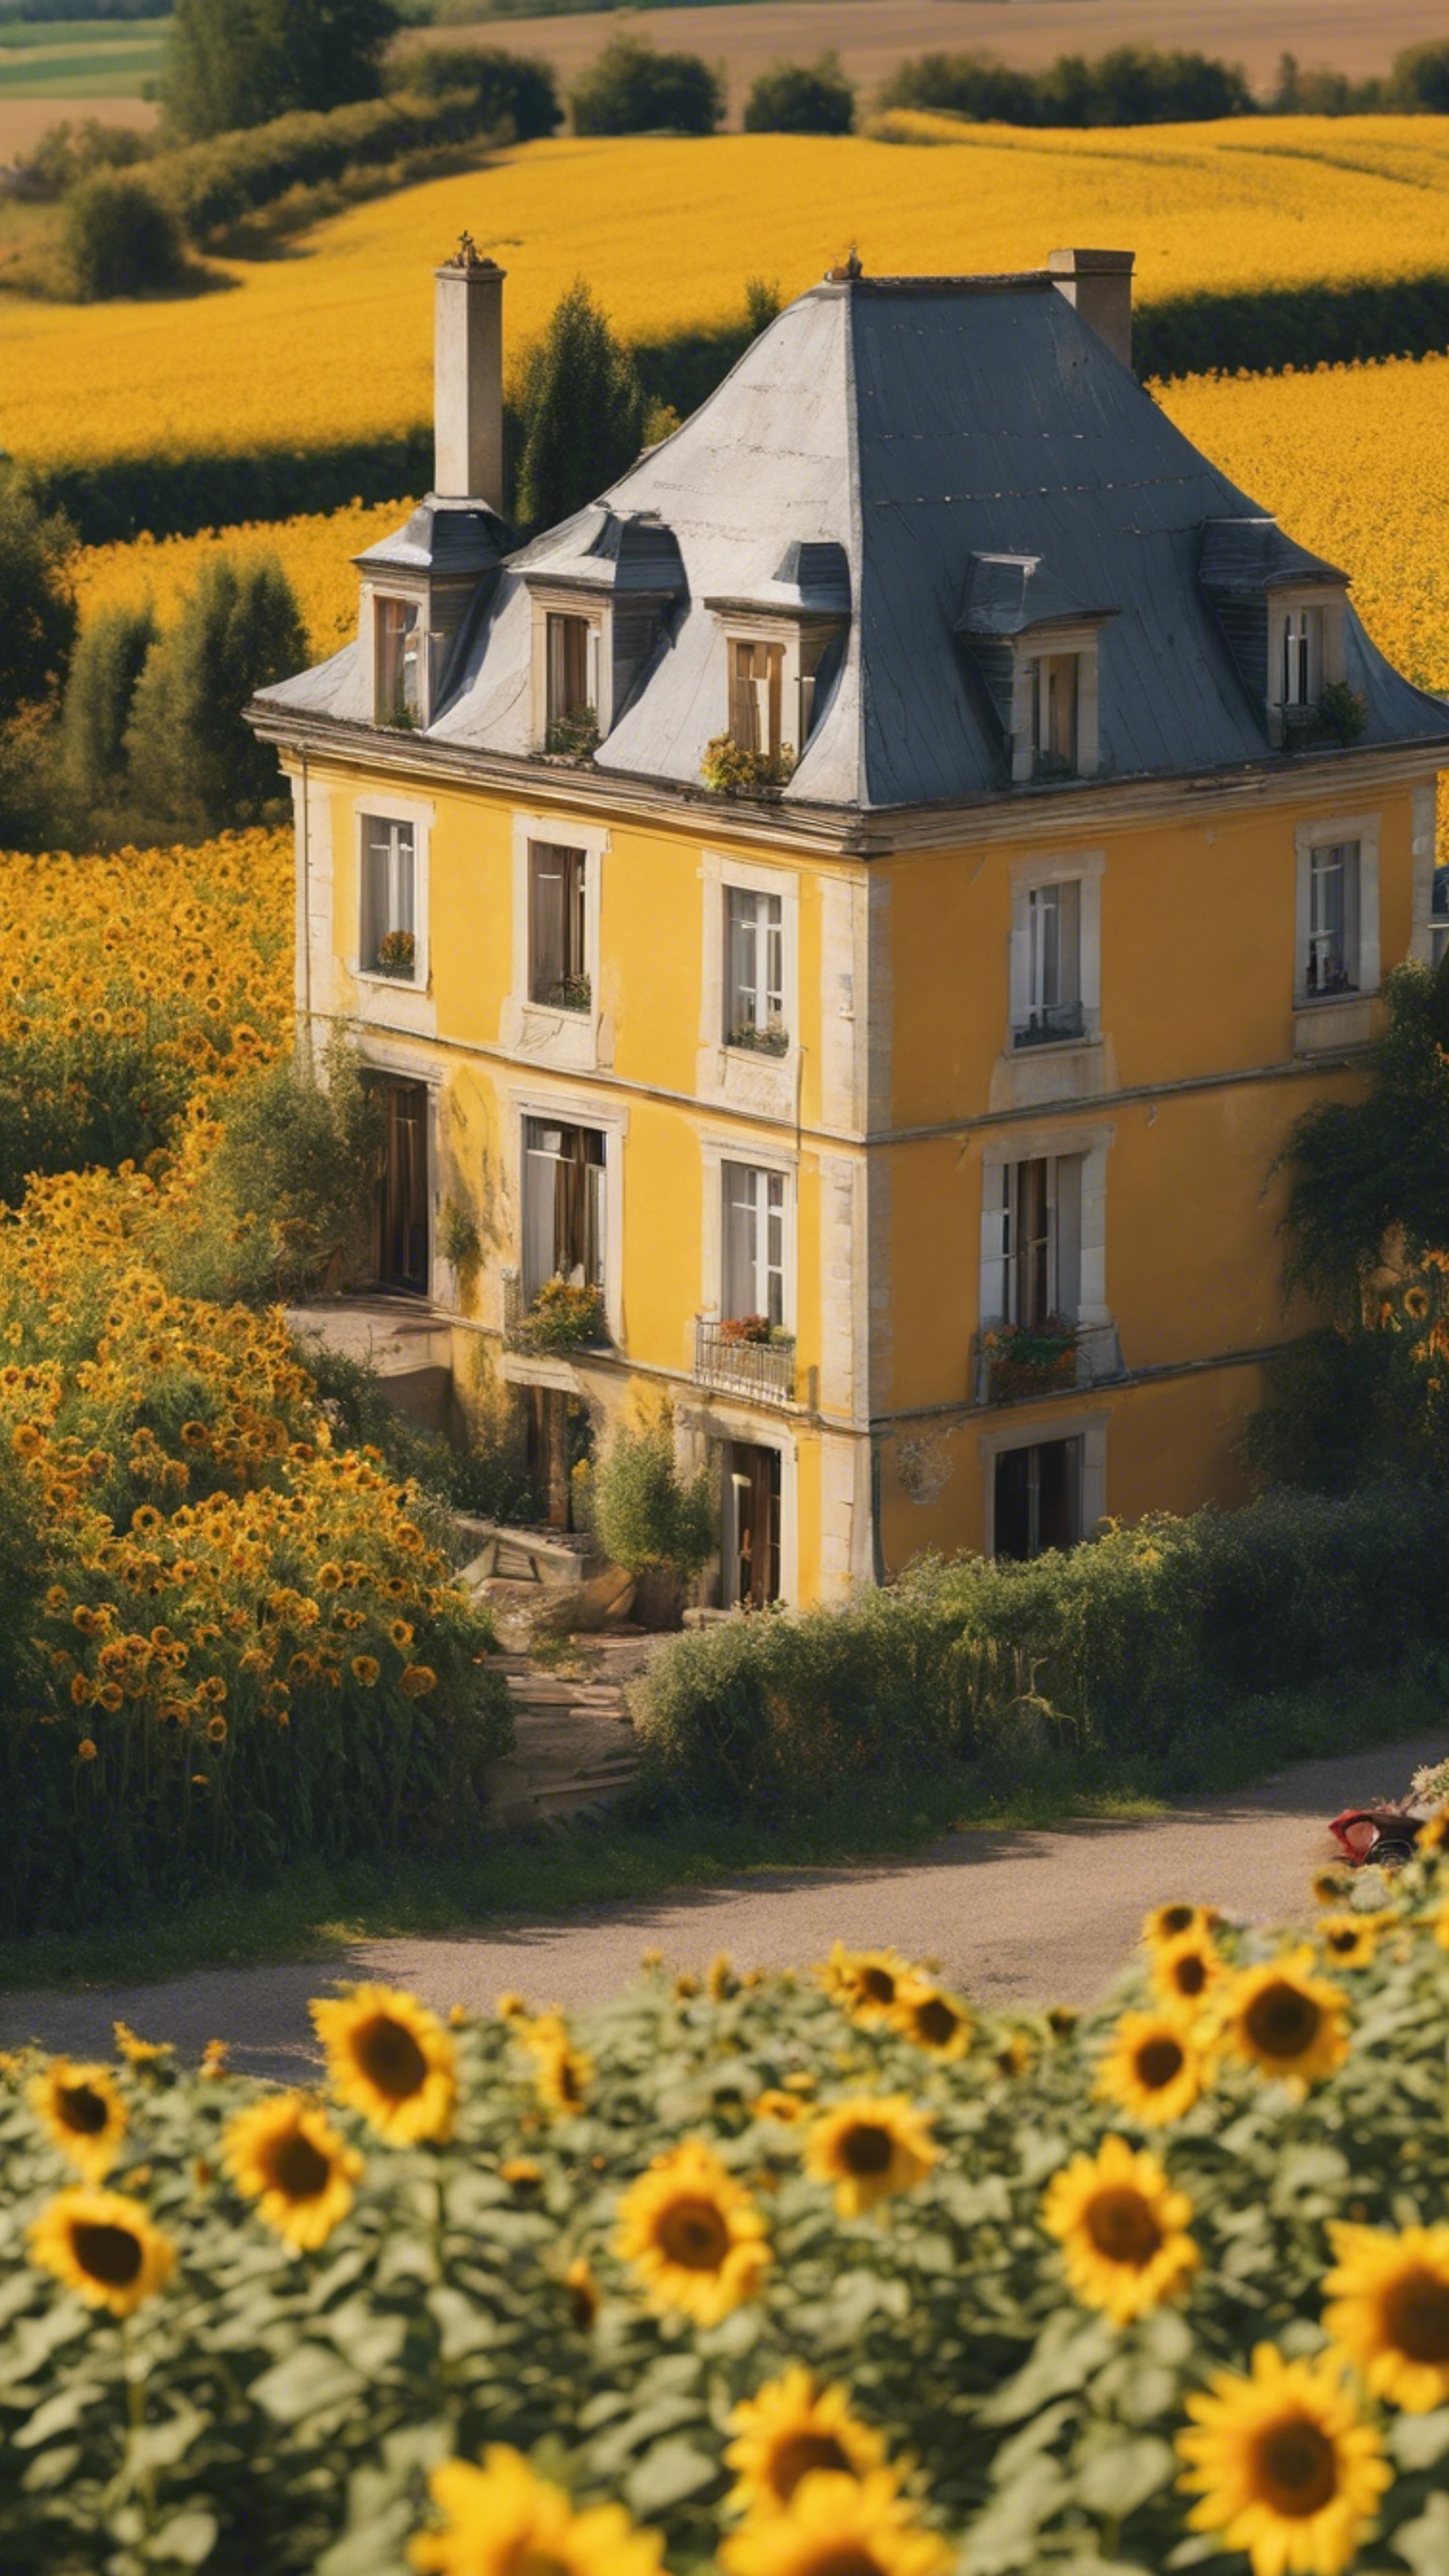 A quaint French country house nestled in a field of bright yellow sunflowers during a sunny afternoon. Sfondo[7540a515ea0143d58f51]